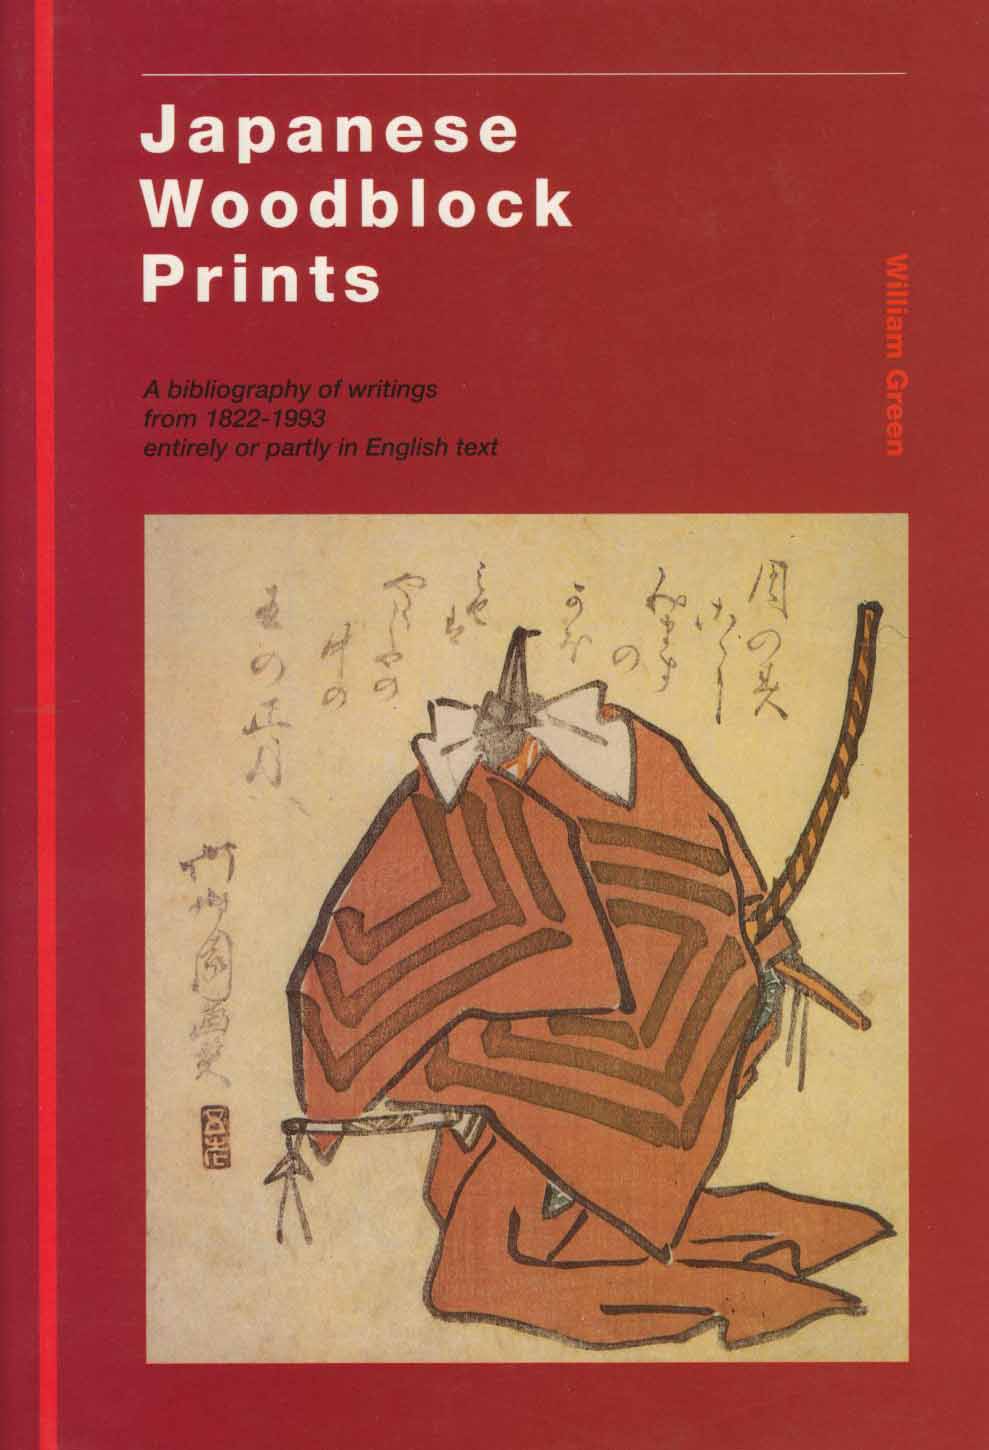 Green, William - Japanese Woodblock Prints - A Bibliography of writings from 1822-1993 entirely or partly in English text.